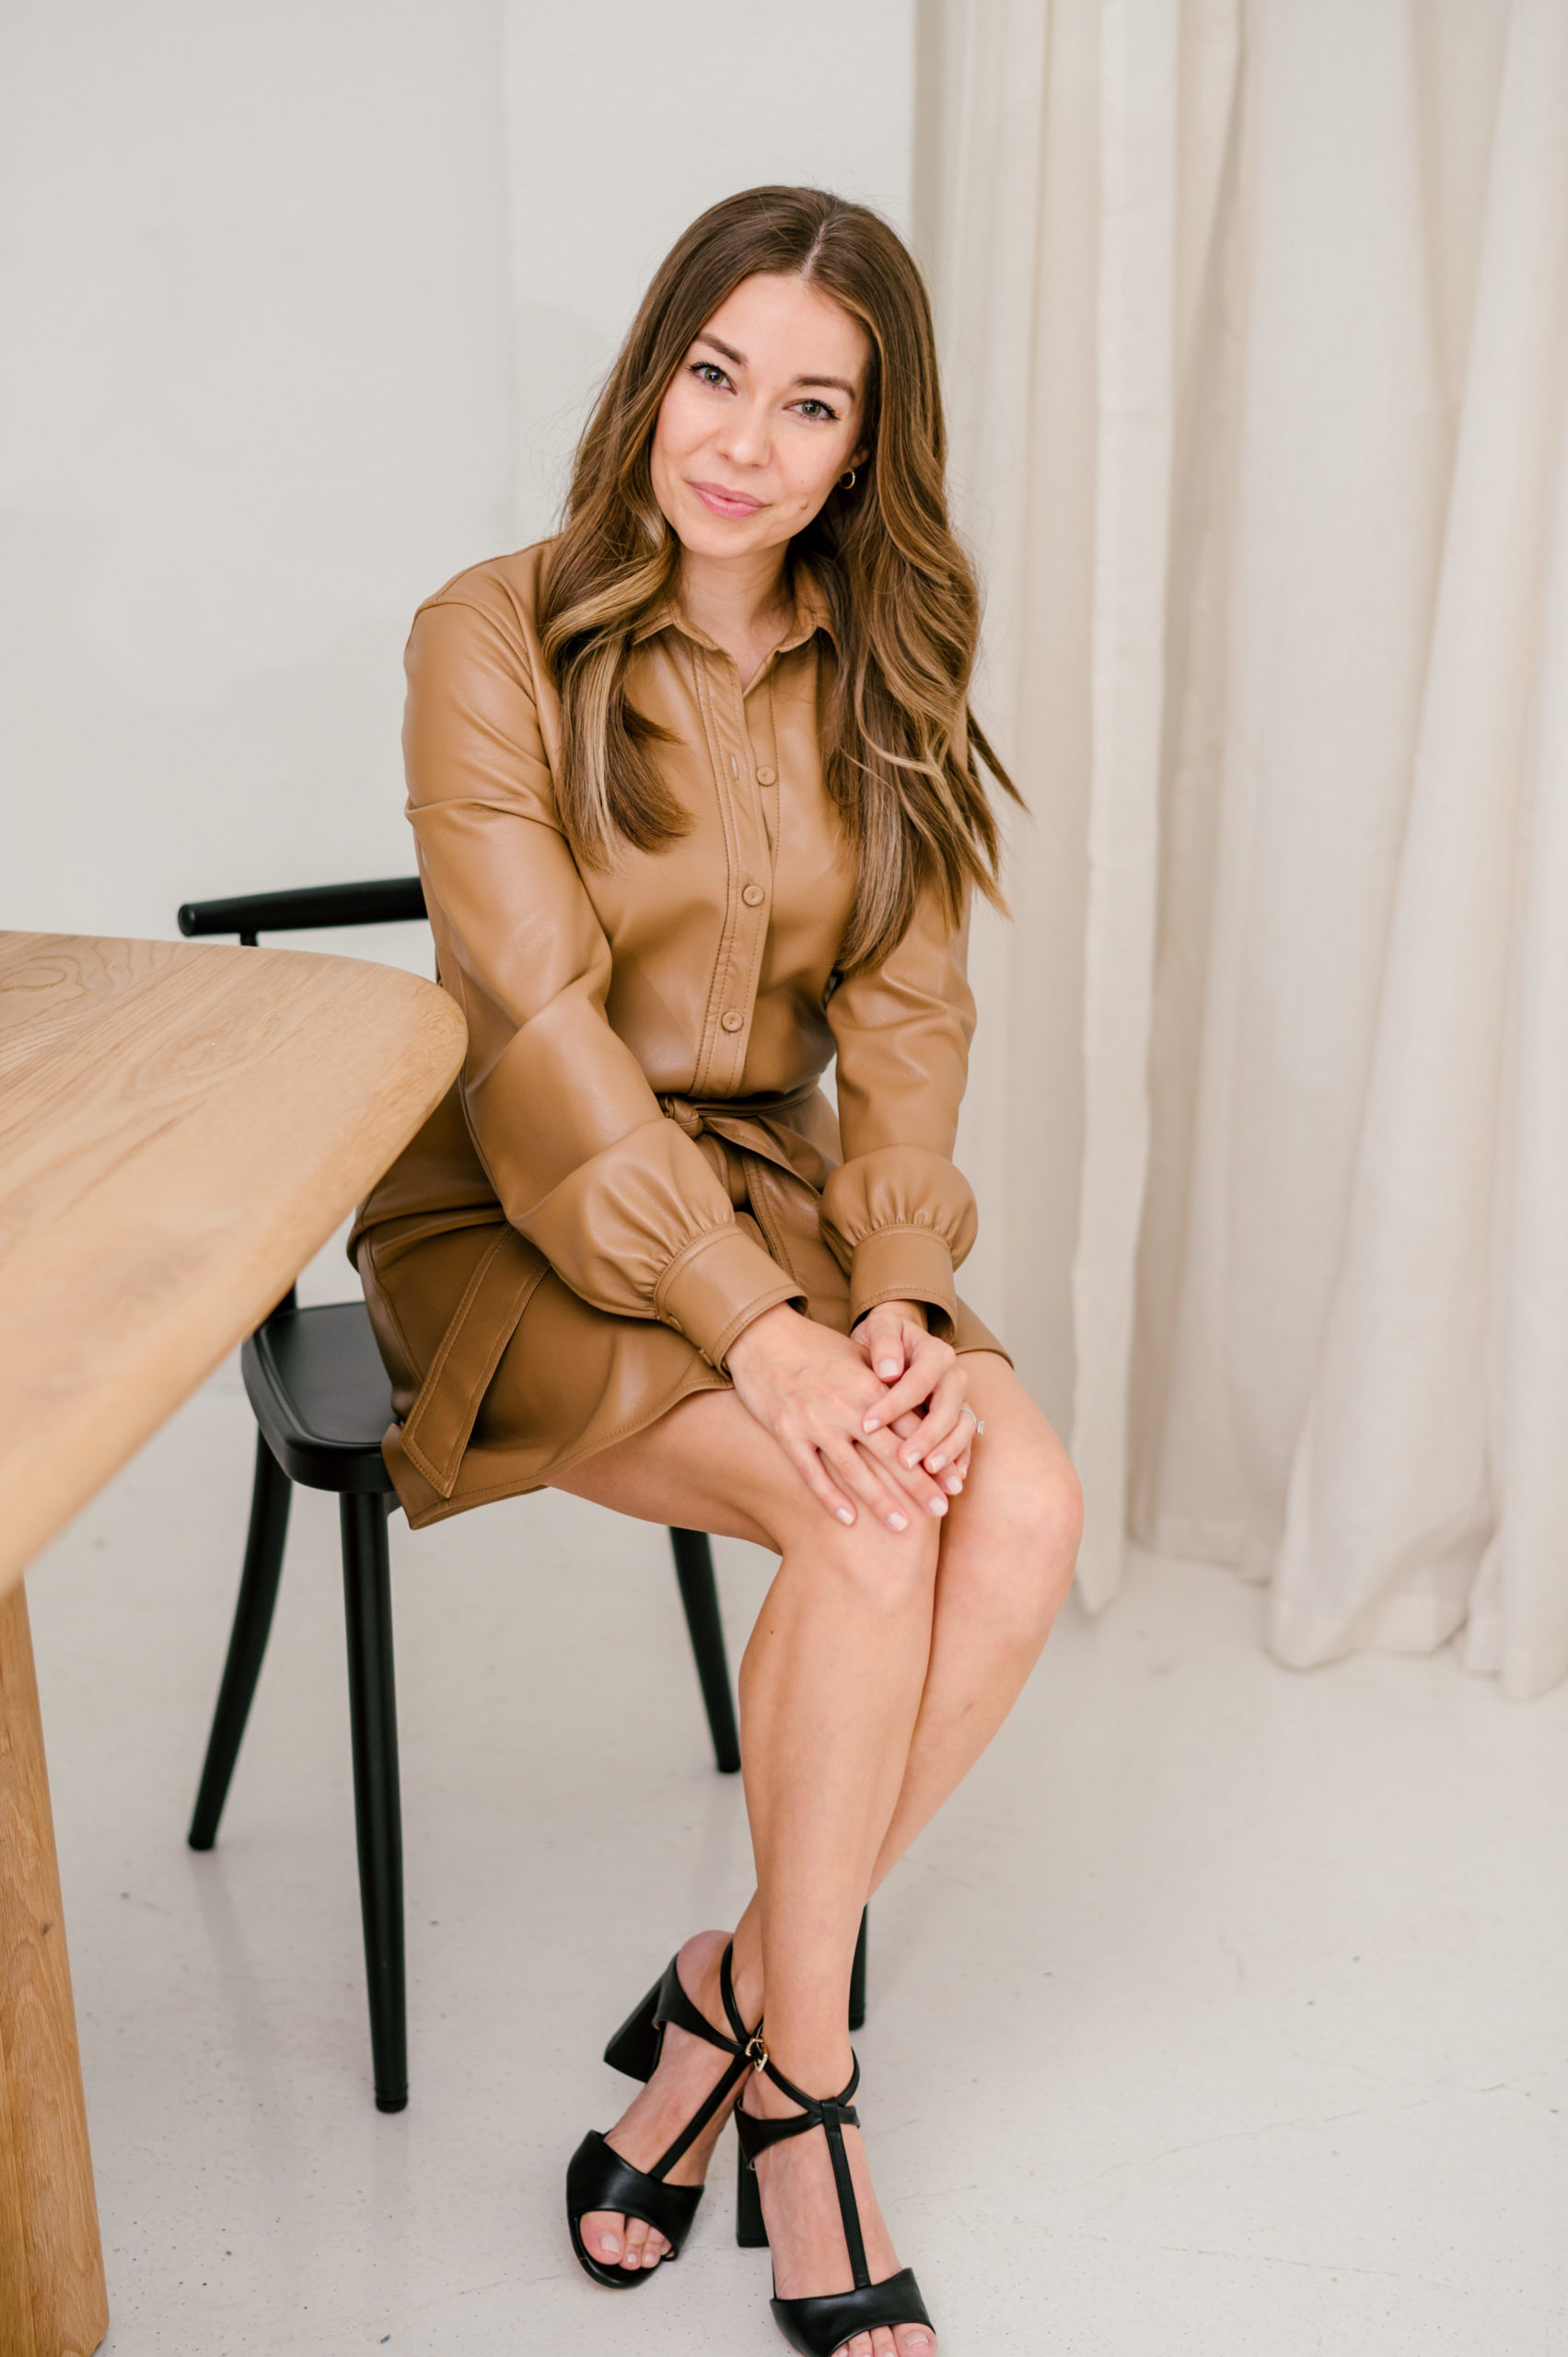 Woman in a brown leather dress sitting down smiling and posing for her brand photography photos